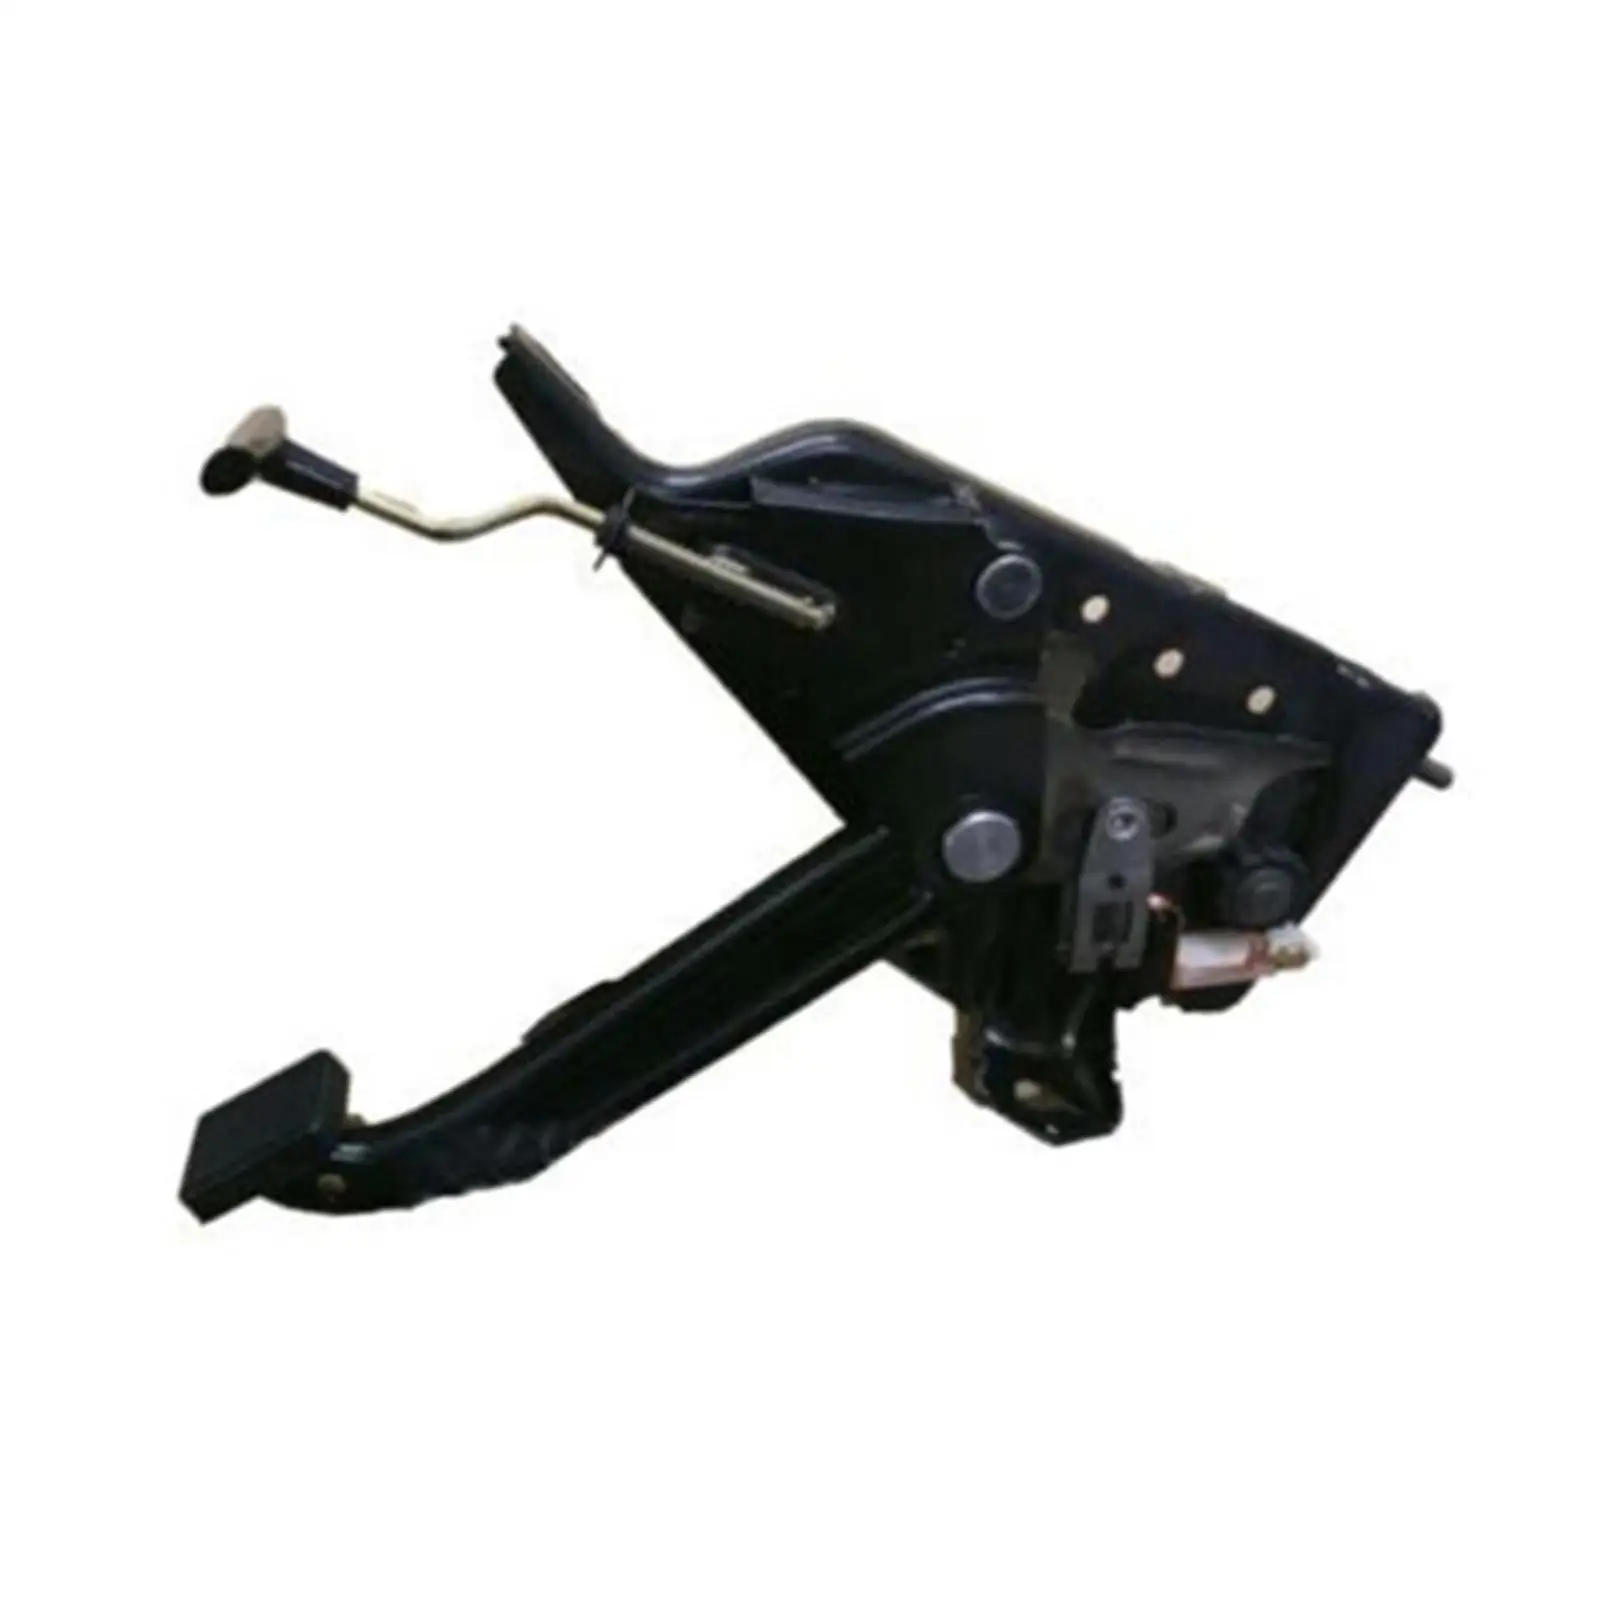 Parking Emergency Brake Pedal Assembly 52003176 05093656AA 5093656AA for Jeep Wrangler Yj CJ Easy Installation Replace